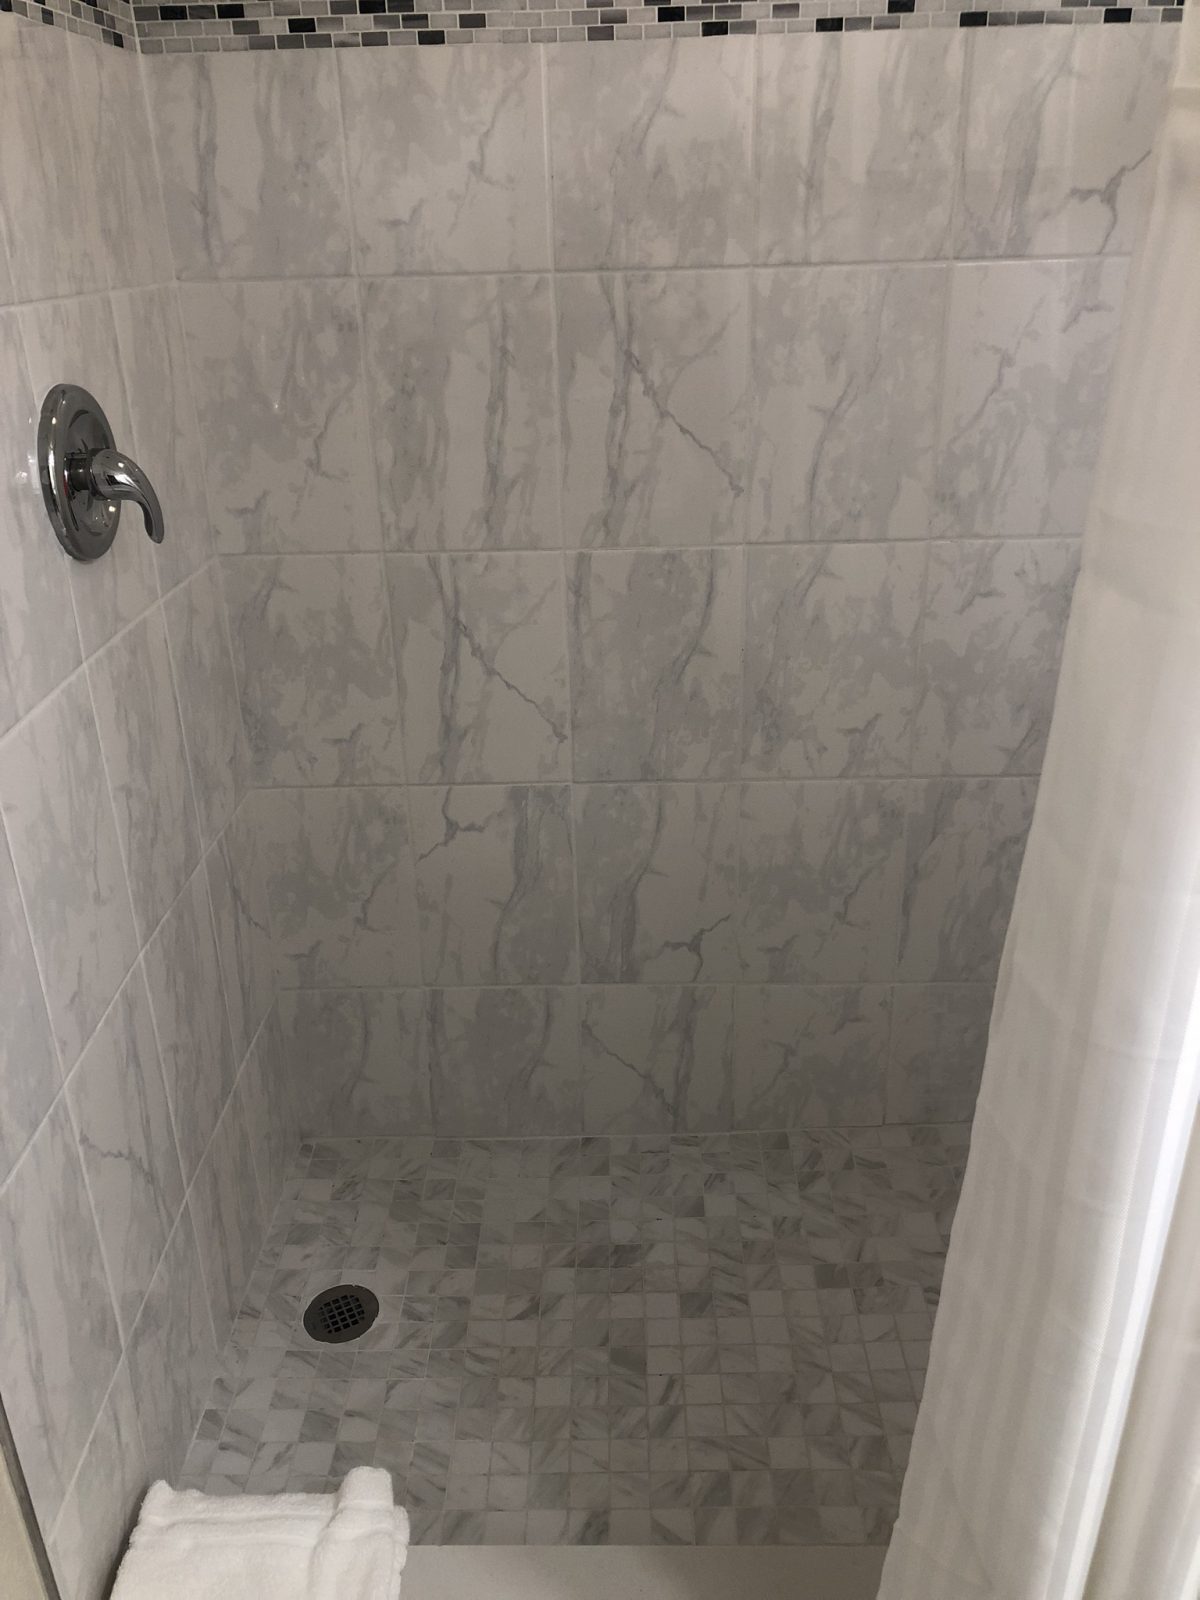 Professional Tile & Grout Cleaning Cincinnati Ohio by Howards Cleaning Service